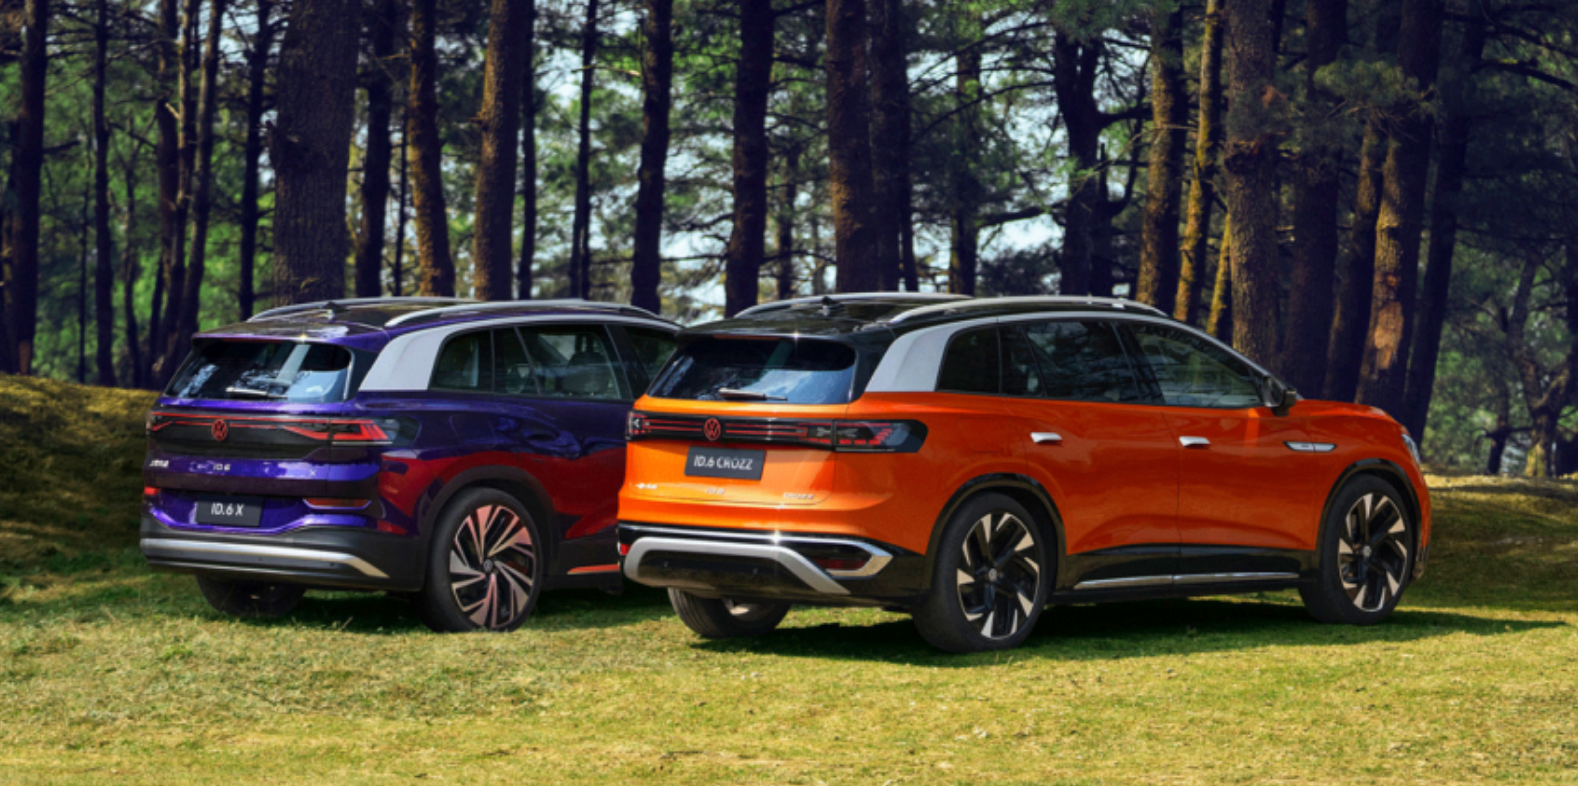 VW’s ID.6, a seven-seater SUV only for China